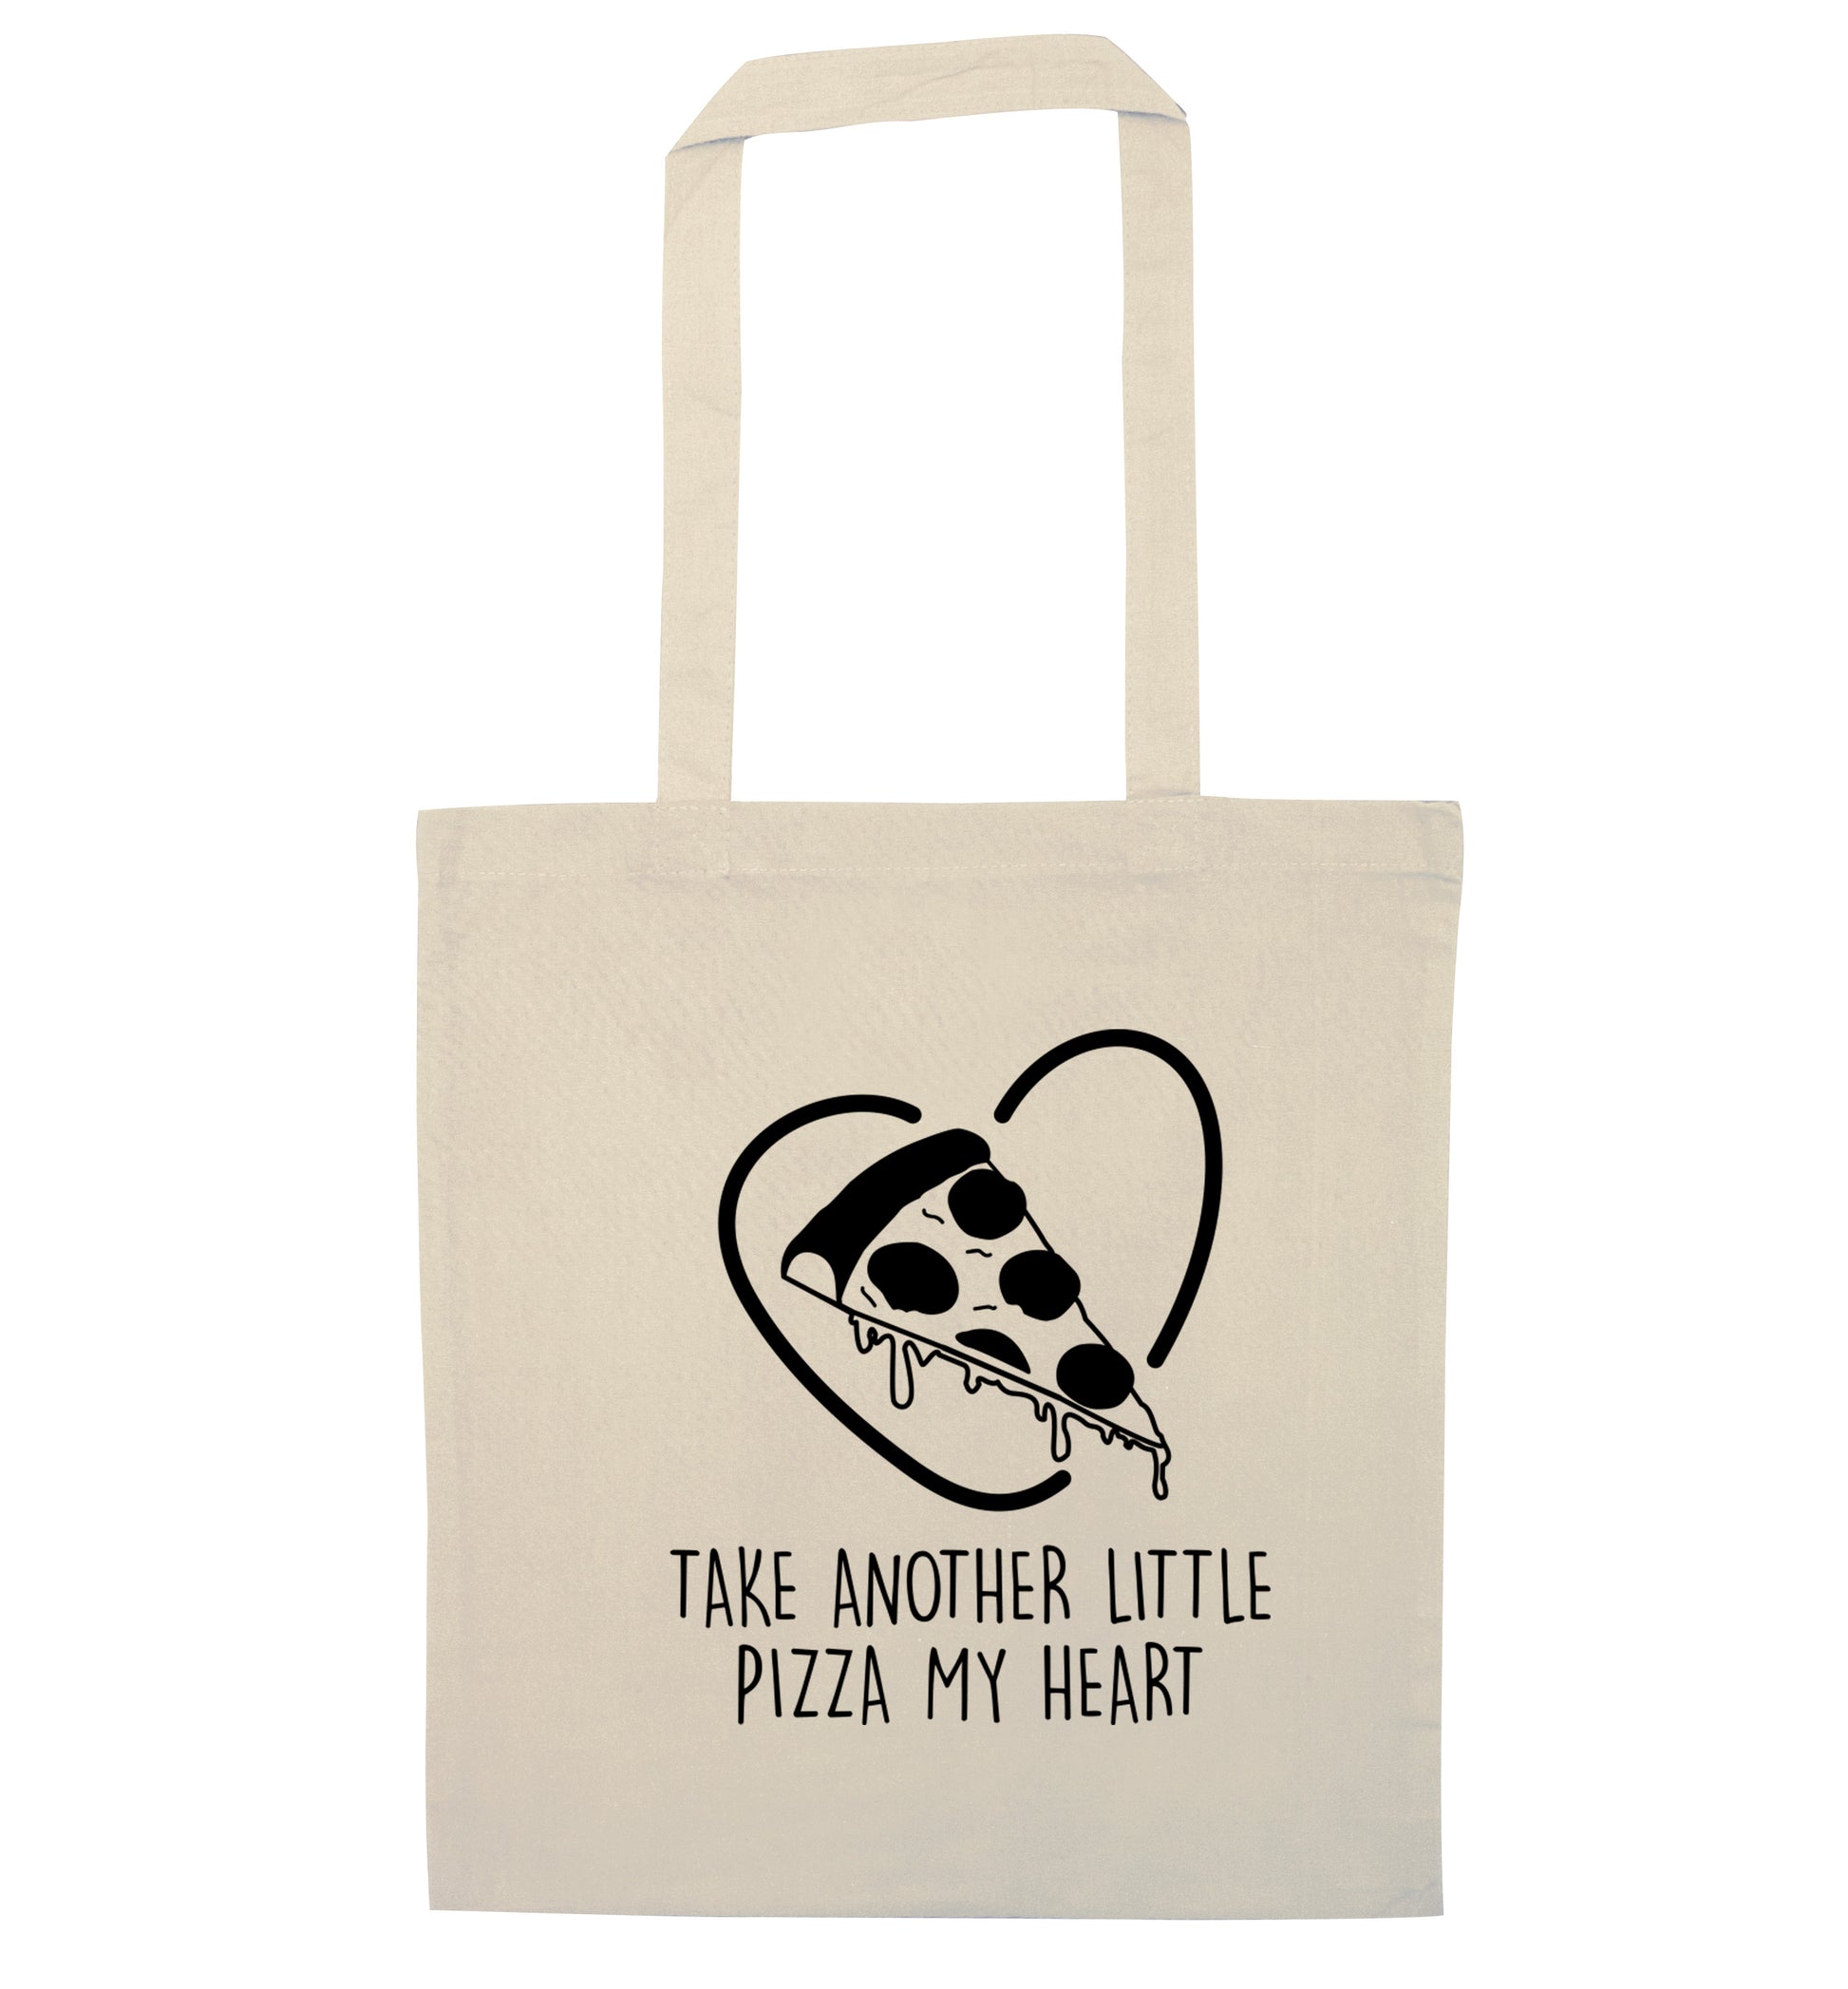 Take another little pizza my heart natural tote bag